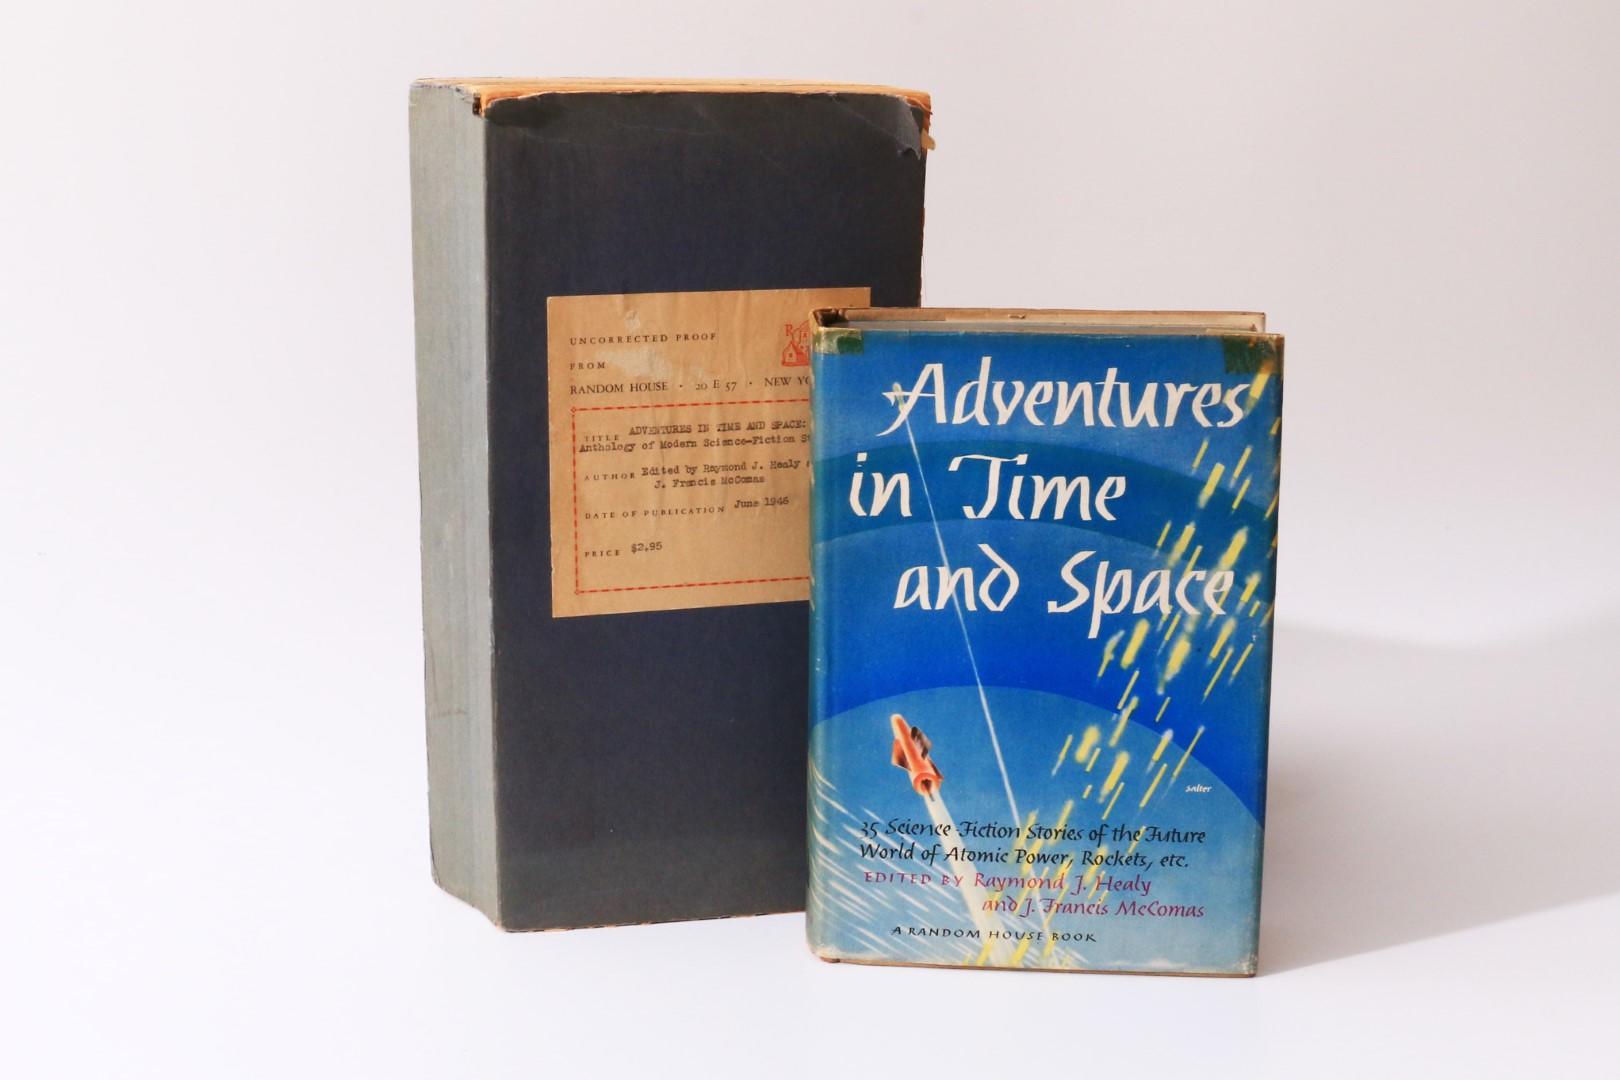 Raymond J. Healy & J. Francis McComas - Adventures in Time and Space w/ Proof - Random House, 1946, First Edition.